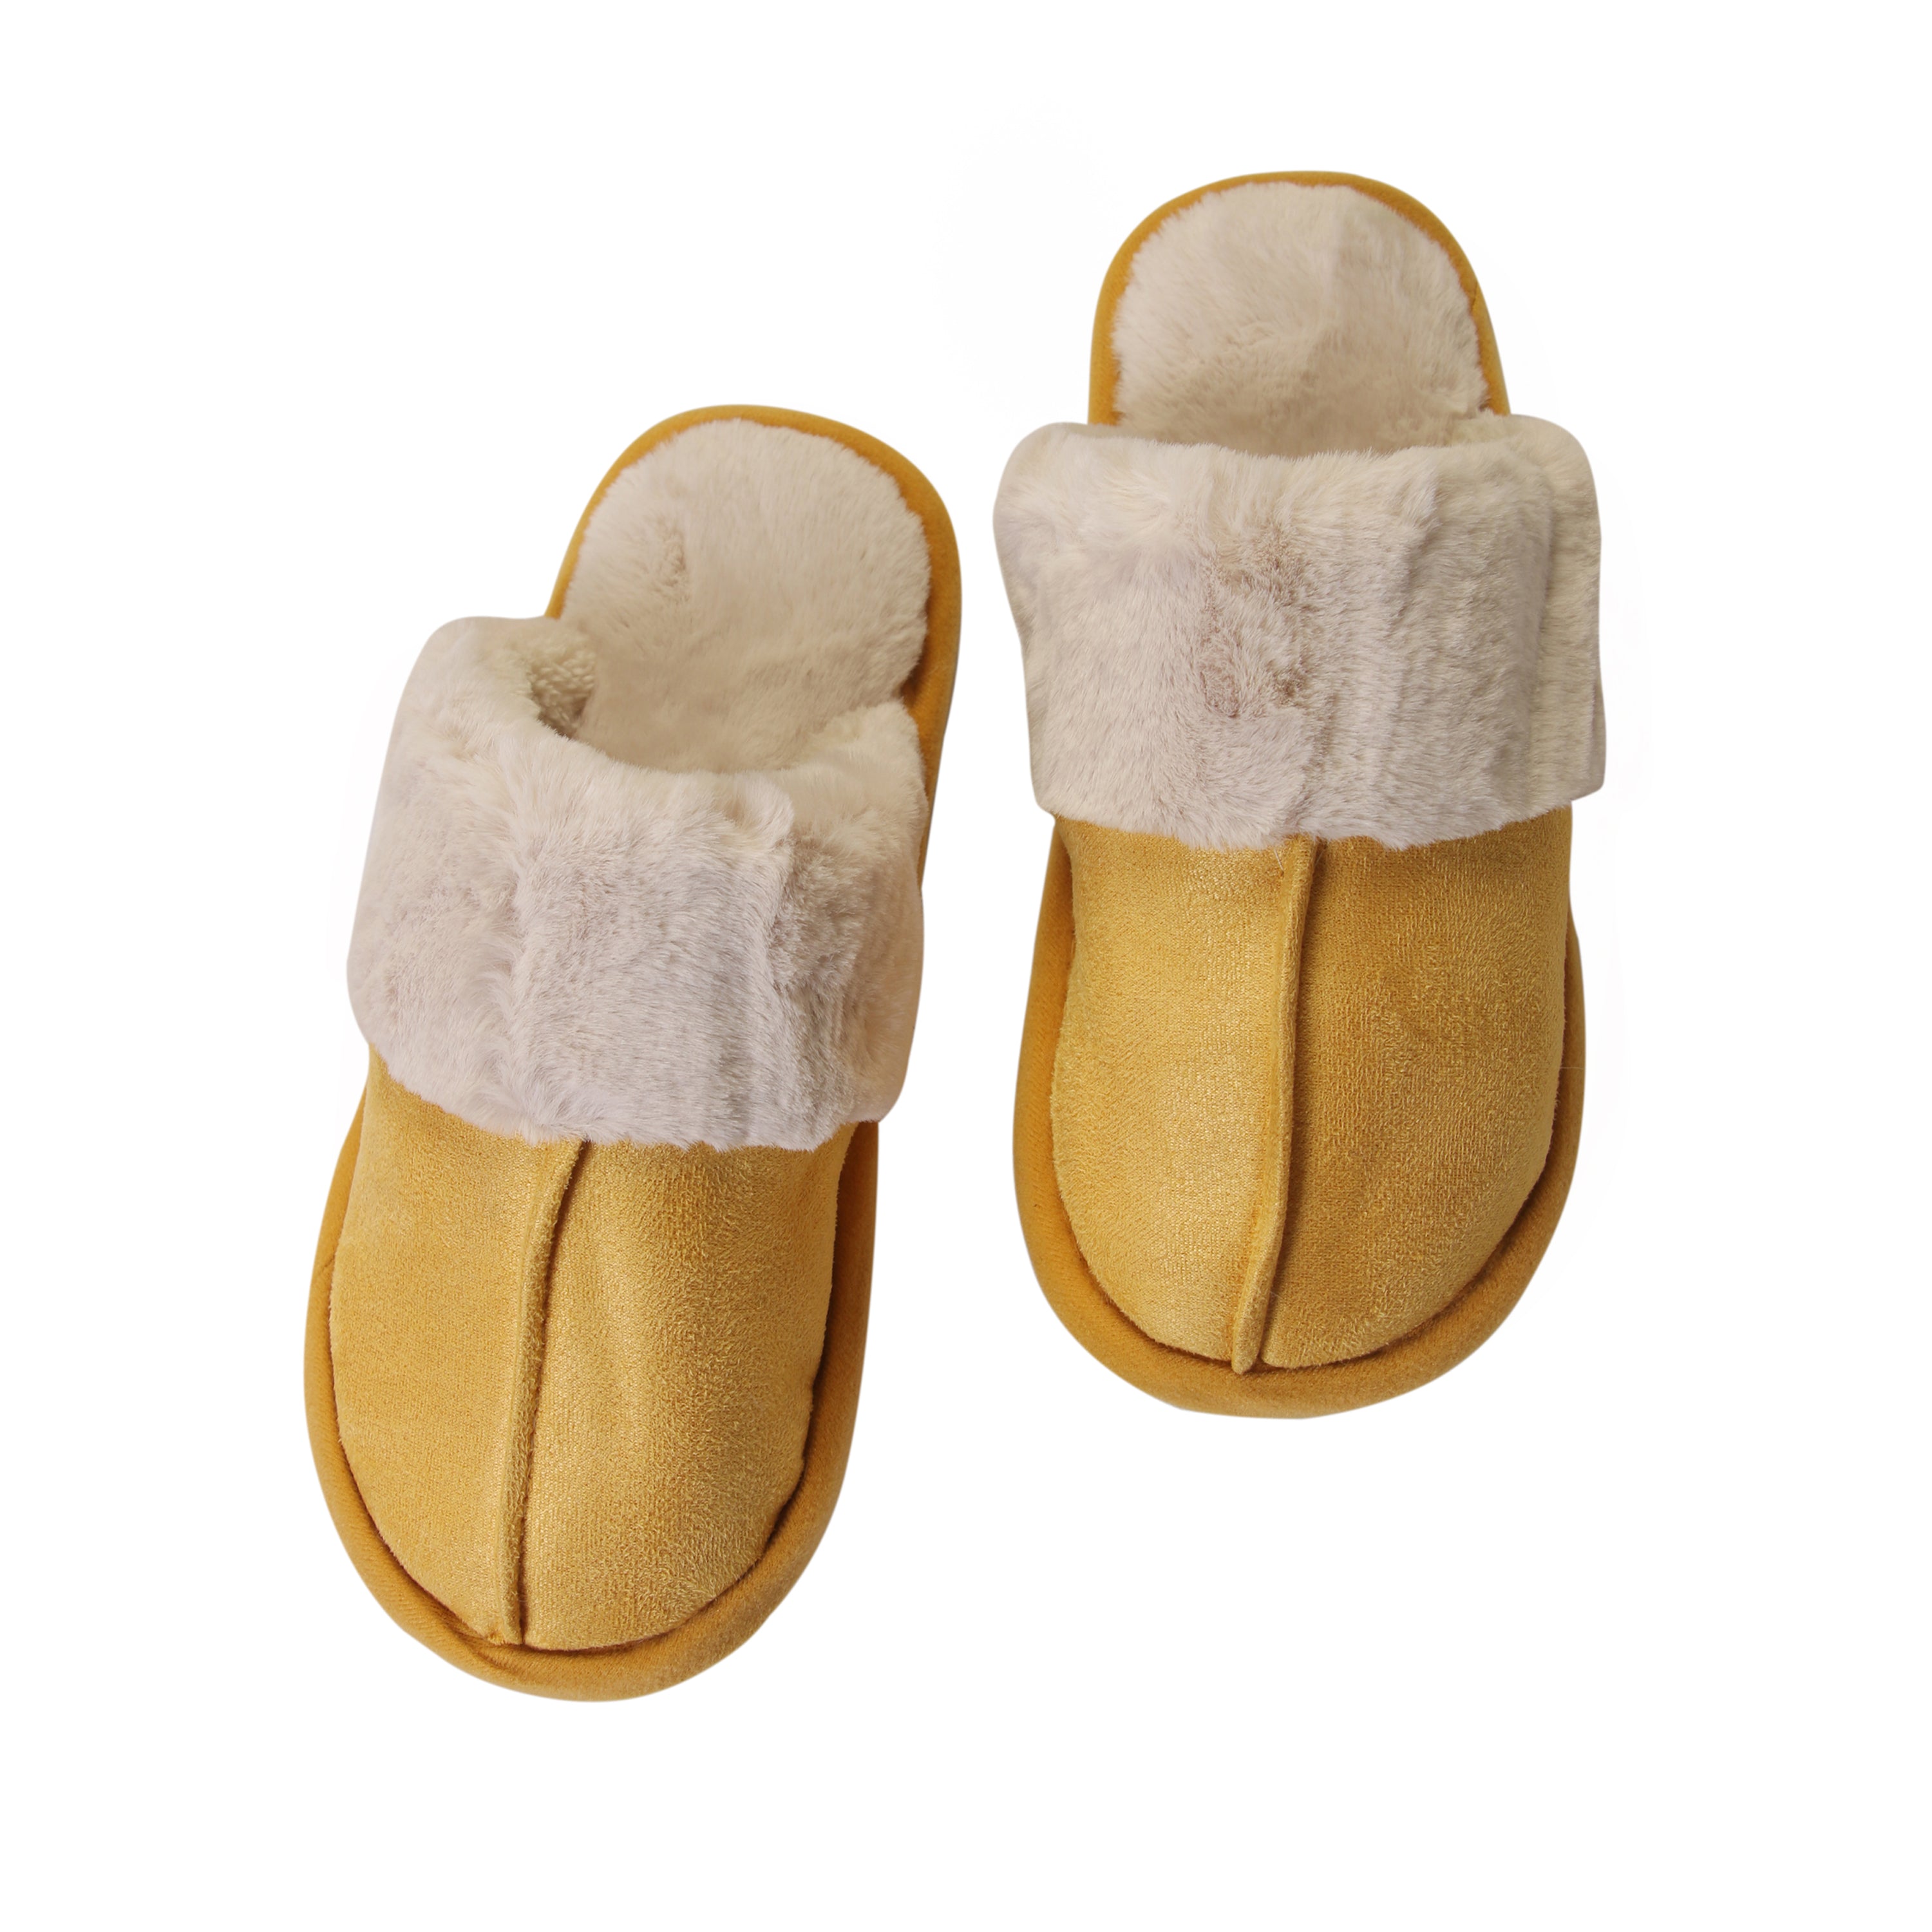 Aggregate more than 93 miscreef slippers best